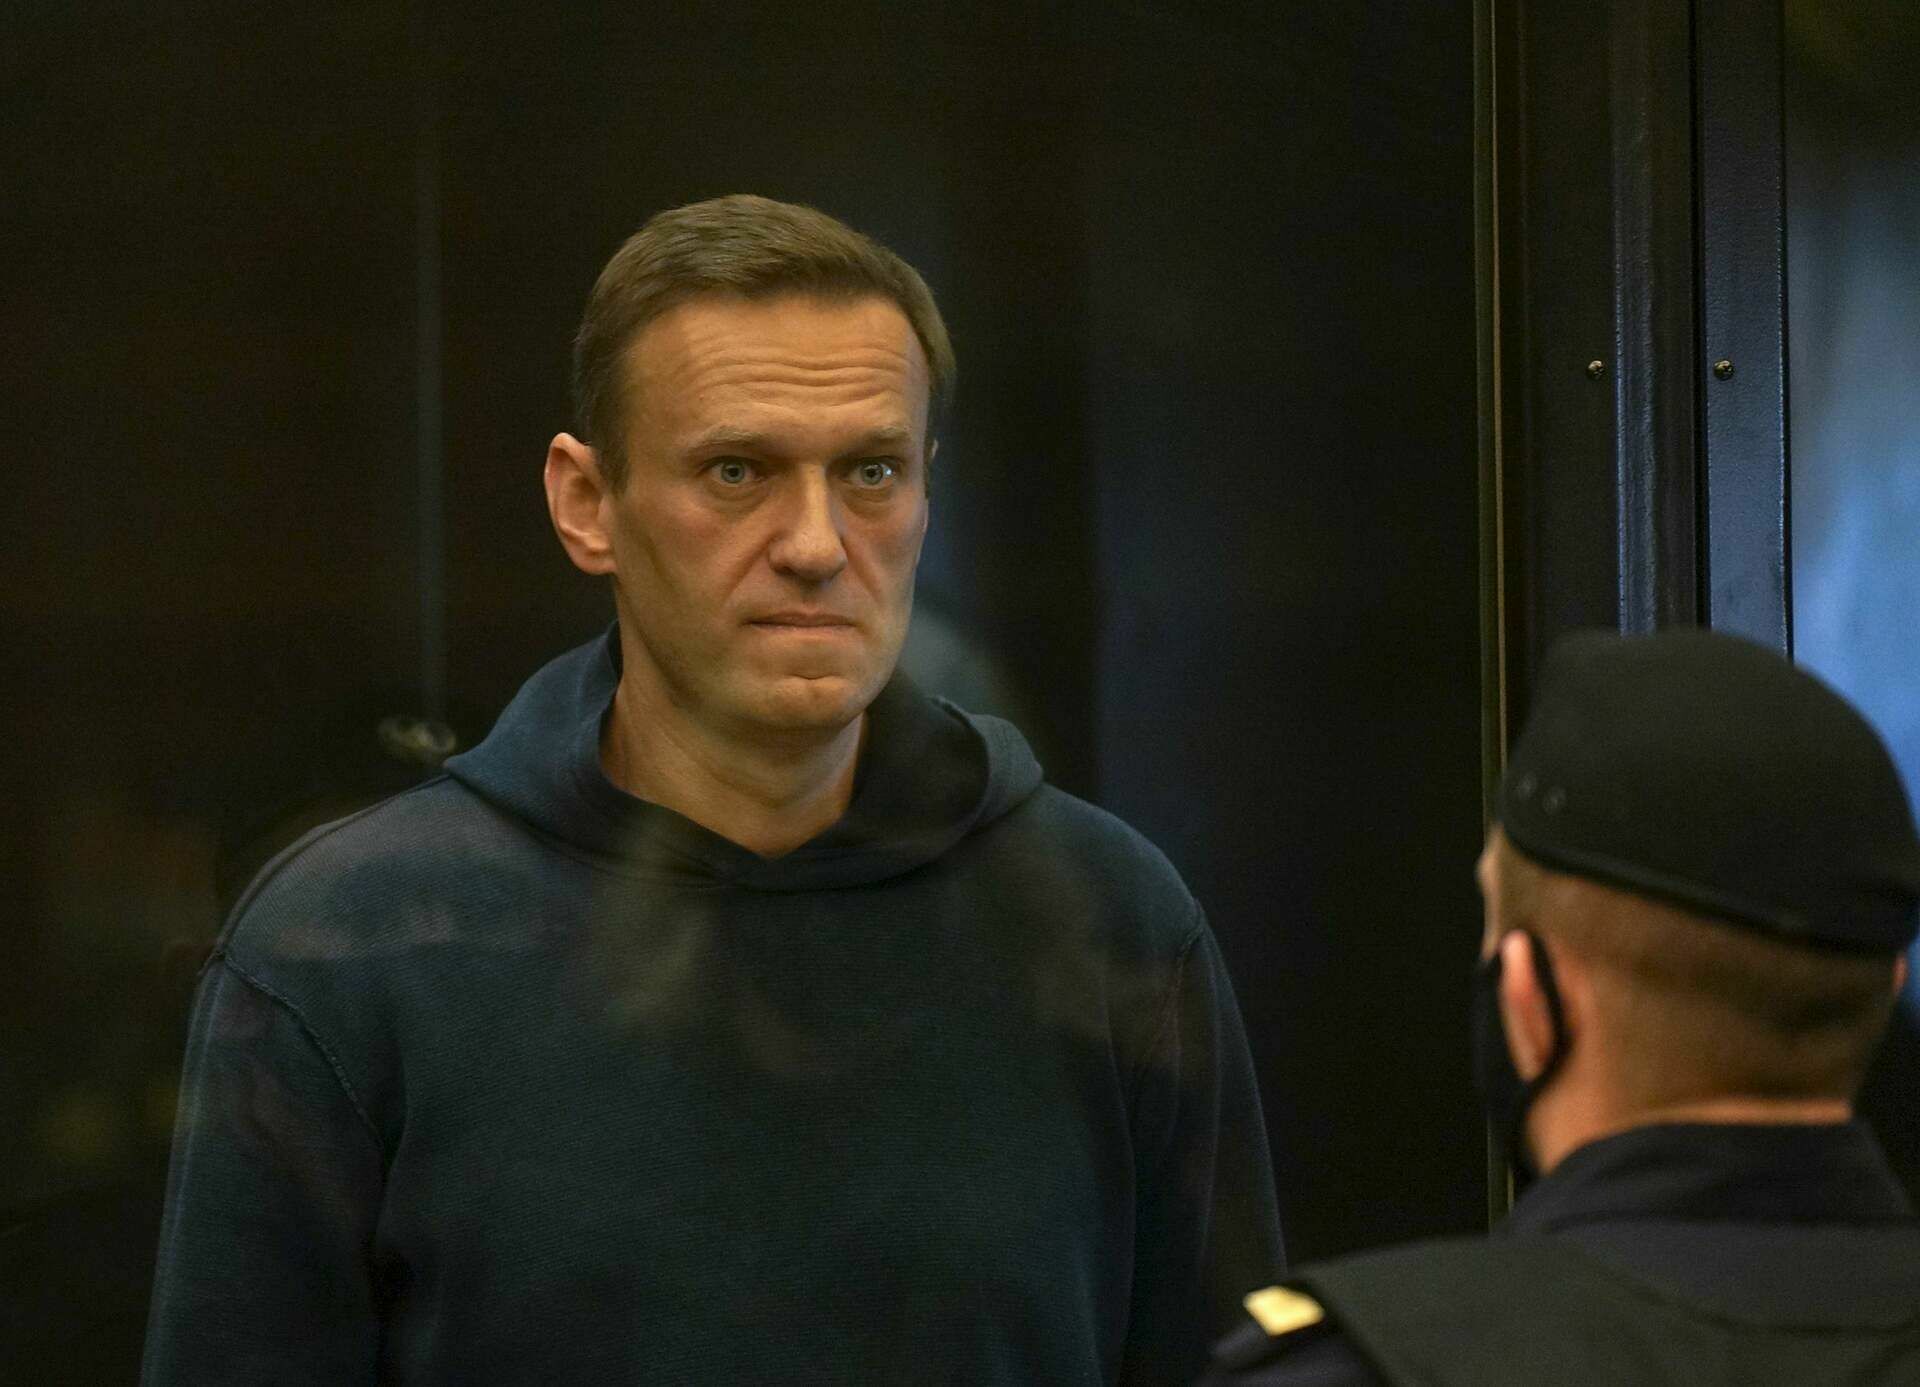 Navalny told about new criminal cases against him